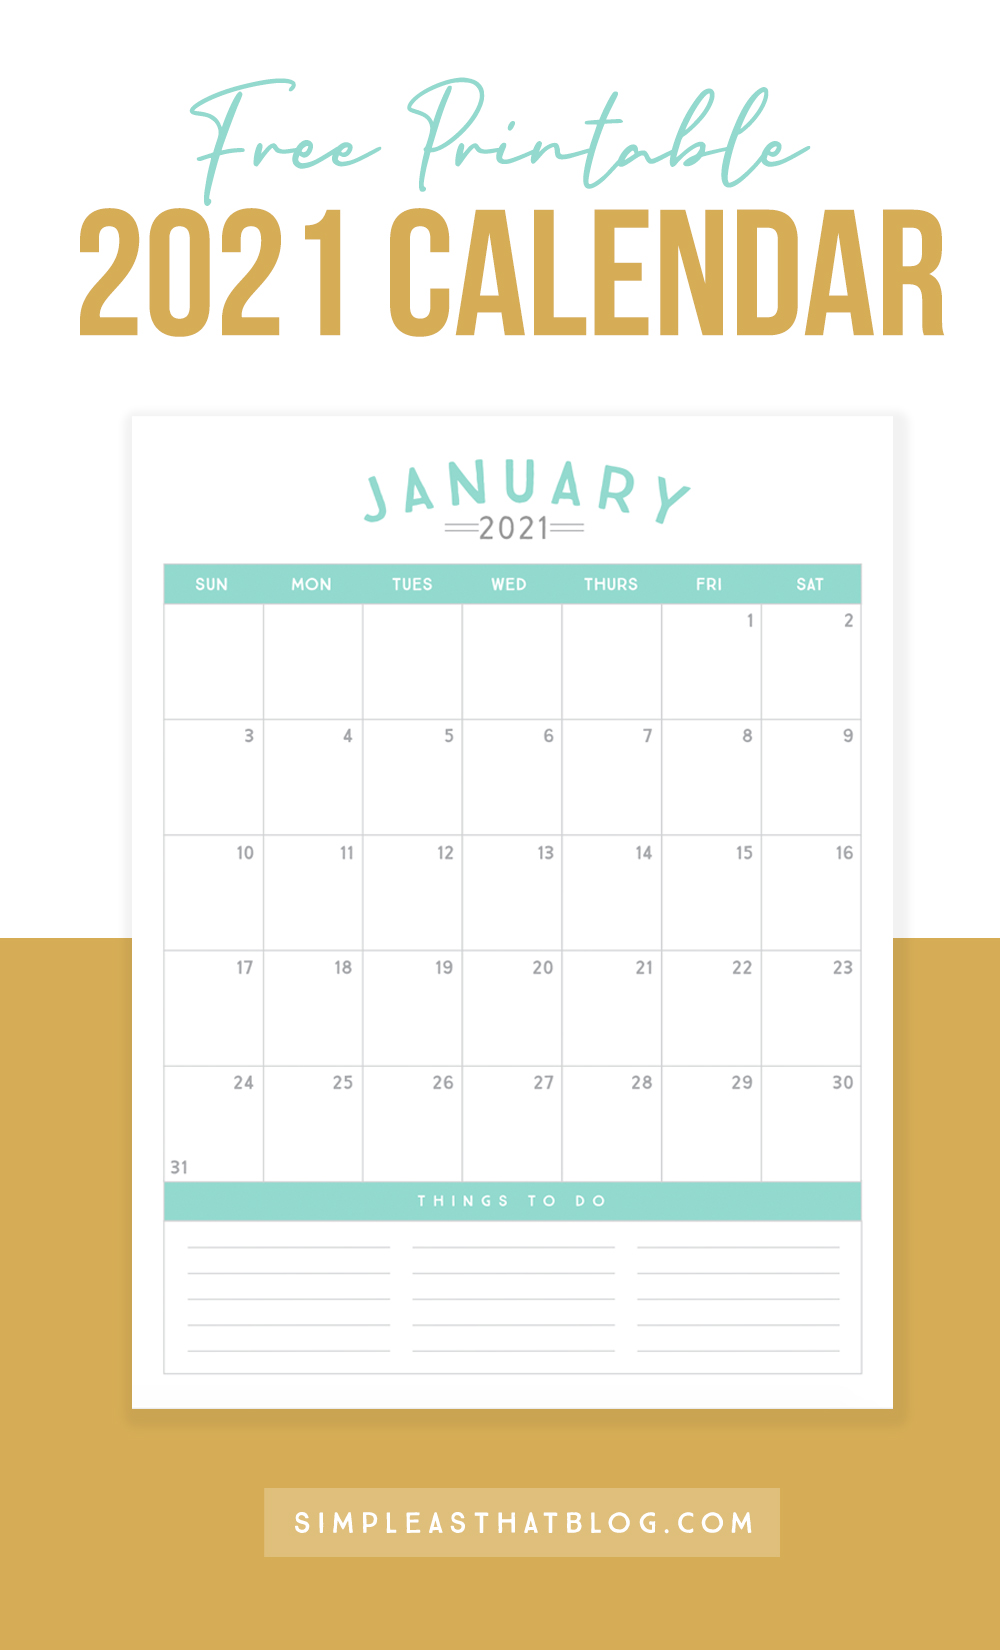 Kick off 2021 with a fresh start and a cute new calendar! This set of 12-month calendars are simple, stream-lined and the perfect planning tool to help you get organized in the new year. Click the link below to download our free printable 2021 calendar!